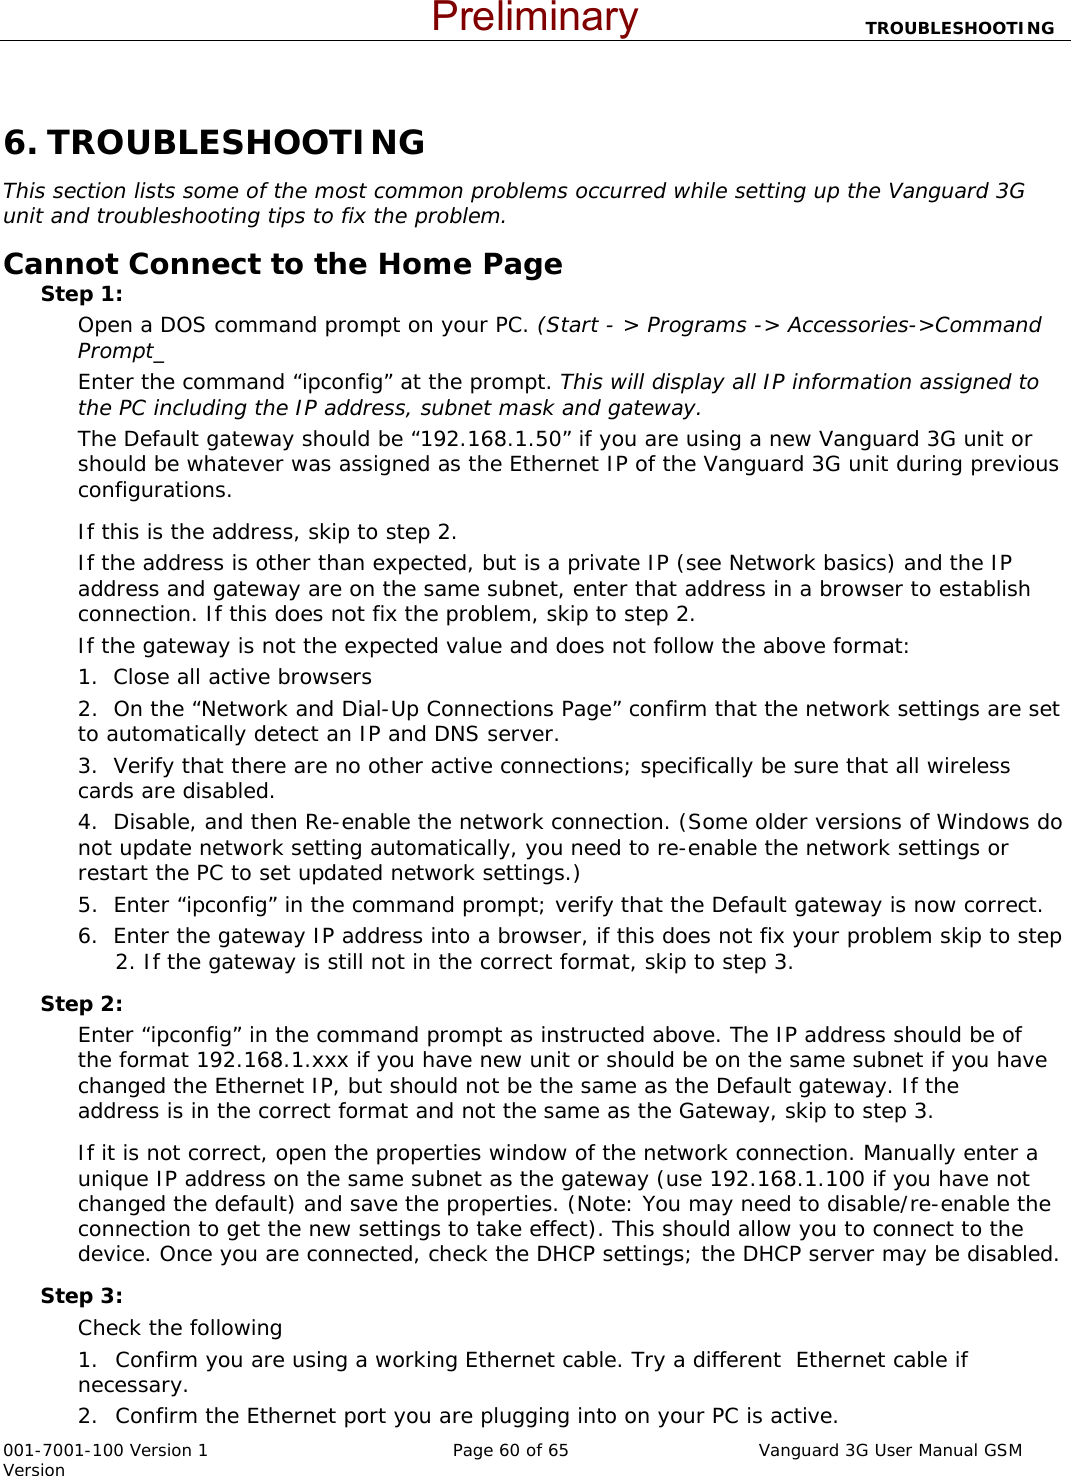                           TROUBLESHOOTING  001-7001-100 Version 1       Page 60 of 65       Vanguard 3G User Manual GSM Version  6. TROUBLESHOOTING This section lists some of the most common problems occurred while setting up the Vanguard 3G unit and troubleshooting tips to fix the problem.   Cannot Connect to the Home Page   Step 1:   Open a DOS command prompt on your PC. (Start - &gt; Programs -&gt; Accessories-&gt;Command Prompt_ Enter the command “ipconfig” at the prompt. This will display all IP information assigned to the PC including the IP address, subnet mask and gateway.   The Default gateway should be “192.168.1.50” if you are using a new Vanguard 3G unit or should be whatever was assigned as the Ethernet IP of the Vanguard 3G unit during previous configurations.     If this is the address, skip to step 2.     If the address is other than expected, but is a private IP (see Network basics) and the IP address and gateway are on the same subnet, enter that address in a browser to establish connection. If this does not fix the problem, skip to step 2. If the gateway is not the expected value and does not follow the above format: 1.  Close all active browsers 2.  On the “Network and Dial-Up Connections Page” confirm that the network settings are set to automatically detect an IP and DNS server. 3.  Verify that there are no other active connections; specifically be sure that all wireless cards are disabled.     4.  Disable, and then Re-enable the network connection. (Some older versions of Windows do not update network setting automatically, you need to re-enable the network settings or restart the PC to set updated network settings.) 5.  Enter “ipconfig” in the command prompt; verify that the Default gateway is now correct.     6.  Enter the gateway IP address into a browser, if this does not fix your problem skip to step    2. If the gateway is still not in the correct format, skip to step 3.   Step 2:   Enter “ipconfig” in the command prompt as instructed above. The IP address should be of the format 192.168.1.xxx if you have new unit or should be on the same subnet if you have  changed the Ethernet IP, but should not be the same as the Default gateway. If the  address is in the correct format and not the same as the Gateway, skip to step 3.   If it is not correct, open the properties window of the network connection. Manually enter a unique IP address on the same subnet as the gateway (use 192.168.1.100 if you have not changed the default) and save the properties. (Note: You may need to disable/re-enable the connection to get the new settings to take effect). This should allow you to connect to the device. Once you are connected, check the DHCP settings; the DHCP server may be disabled.   Step 3:   Check the following 1. Confirm you are using a working Ethernet cable. Try a different  Ethernet cable if necessary.   2. Confirm the Ethernet port you are plugging into on your PC is active. Preliminary